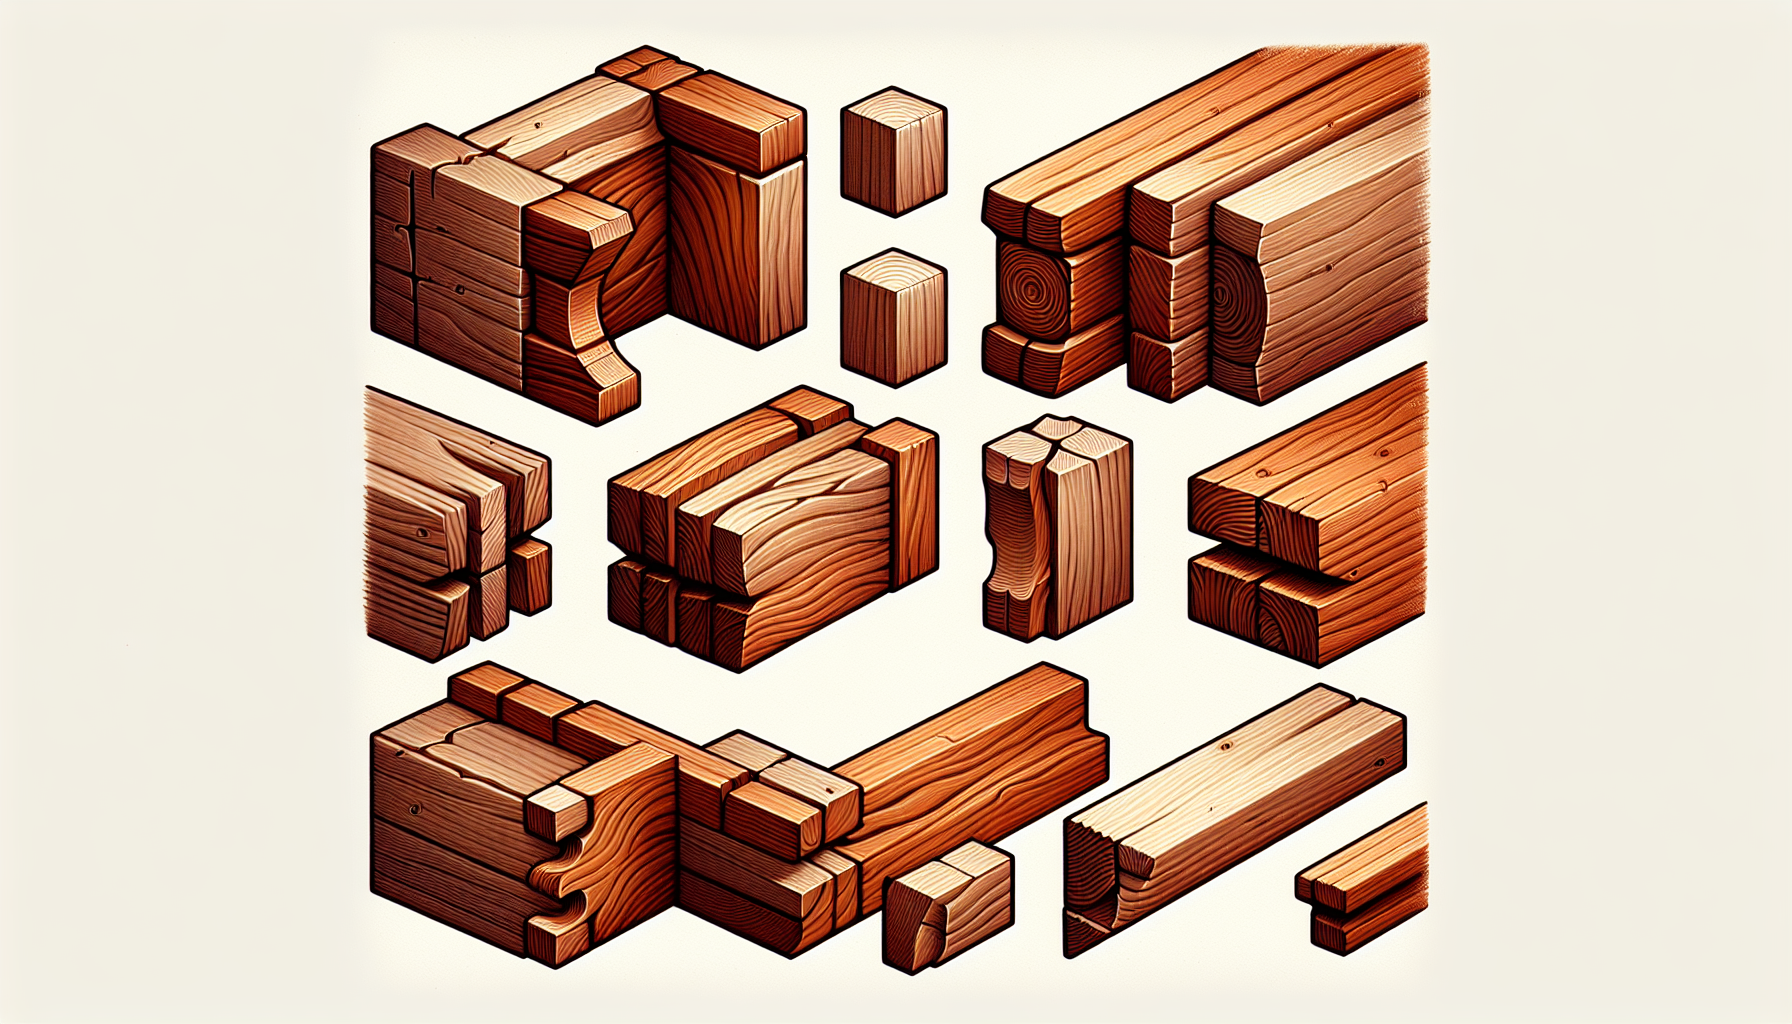 Illustration of traditional timber frame joinery